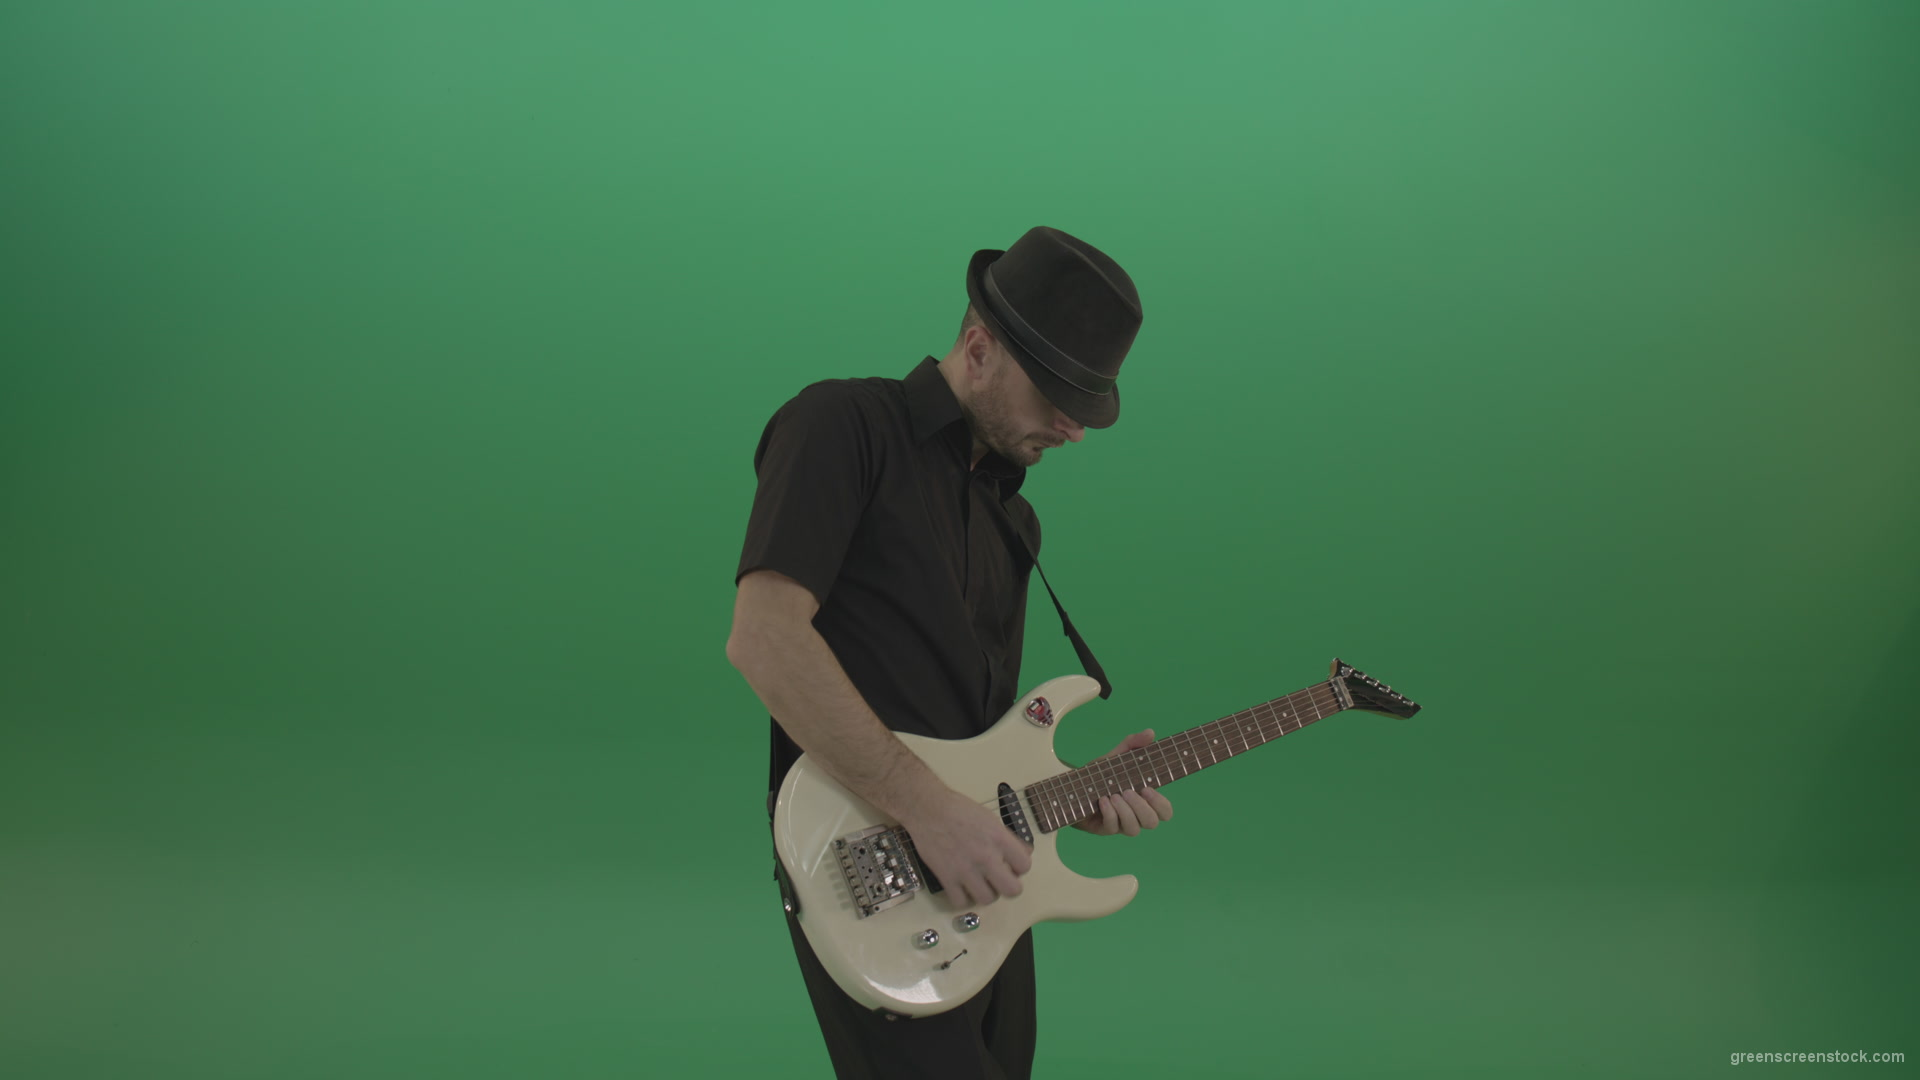 Virtuoso-guitarist-in-black-costume-and-hat-playing-solo-on-white-electro-guitar-siolated-on-green-screen_008 Green Screen Stock